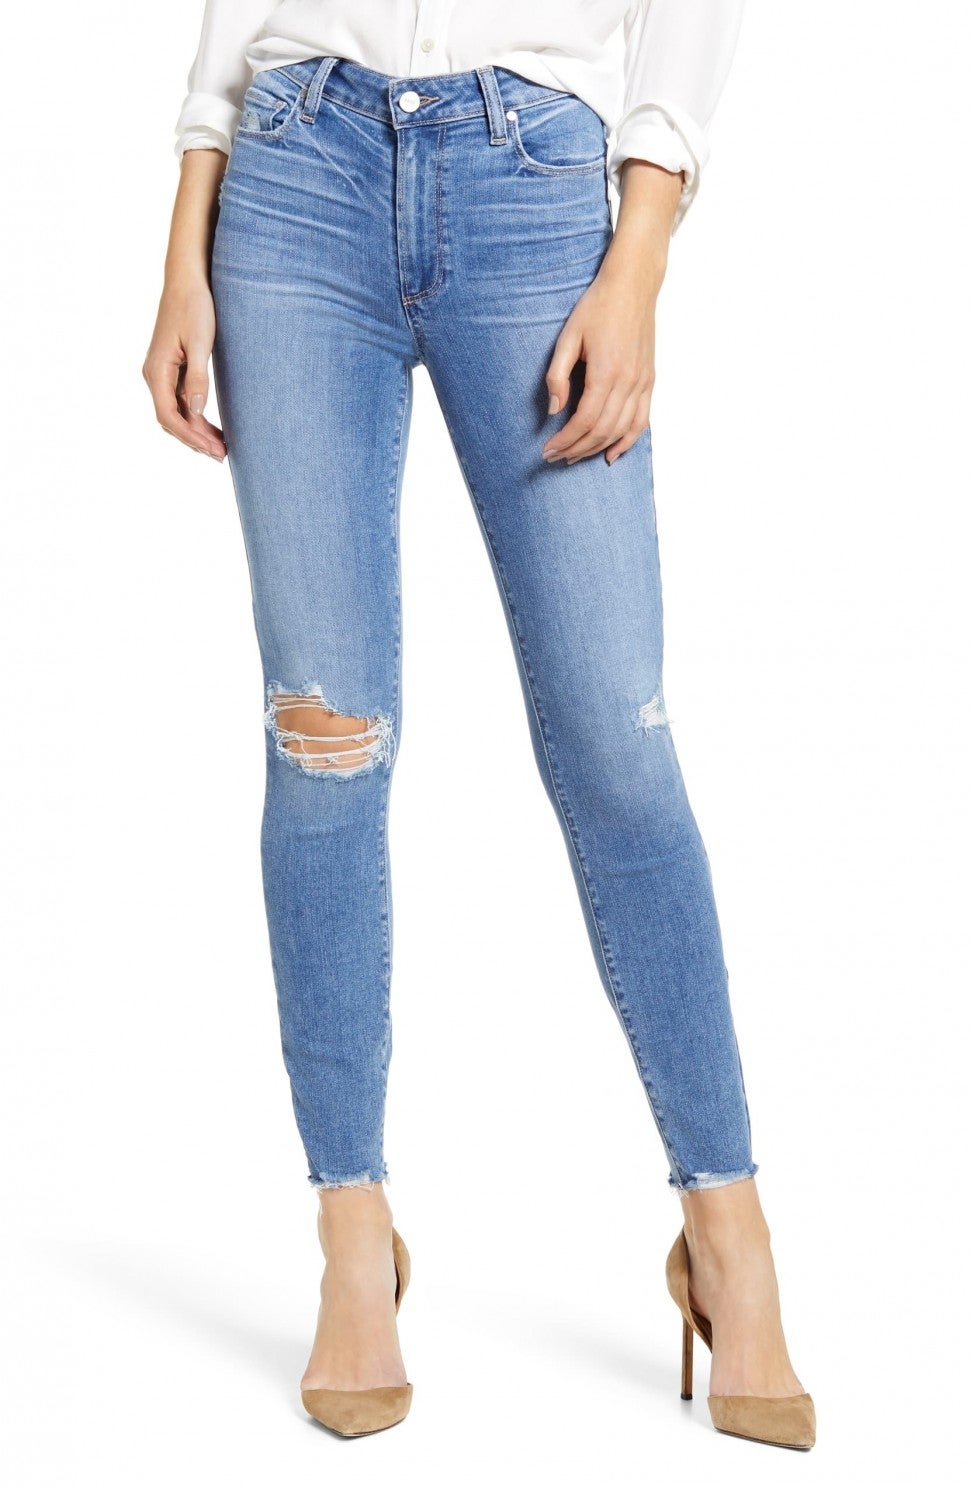 Paige Hoxton Ripped High Waist Skinny Jeans